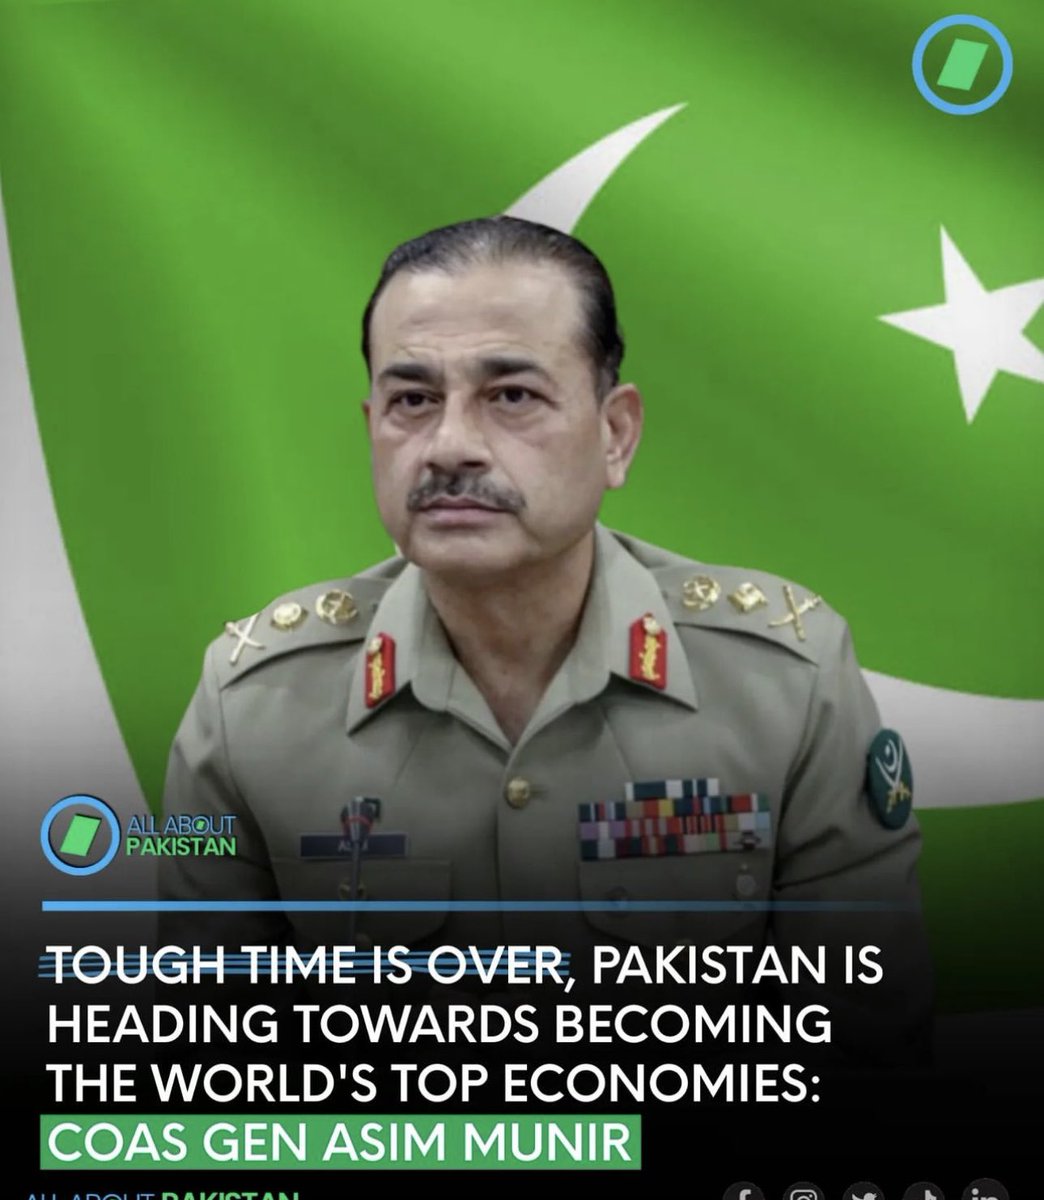 Why is the COAS of Pakistan commenting publicly on the nations economy.?That is not his job. 
#PakistanUnderSiege